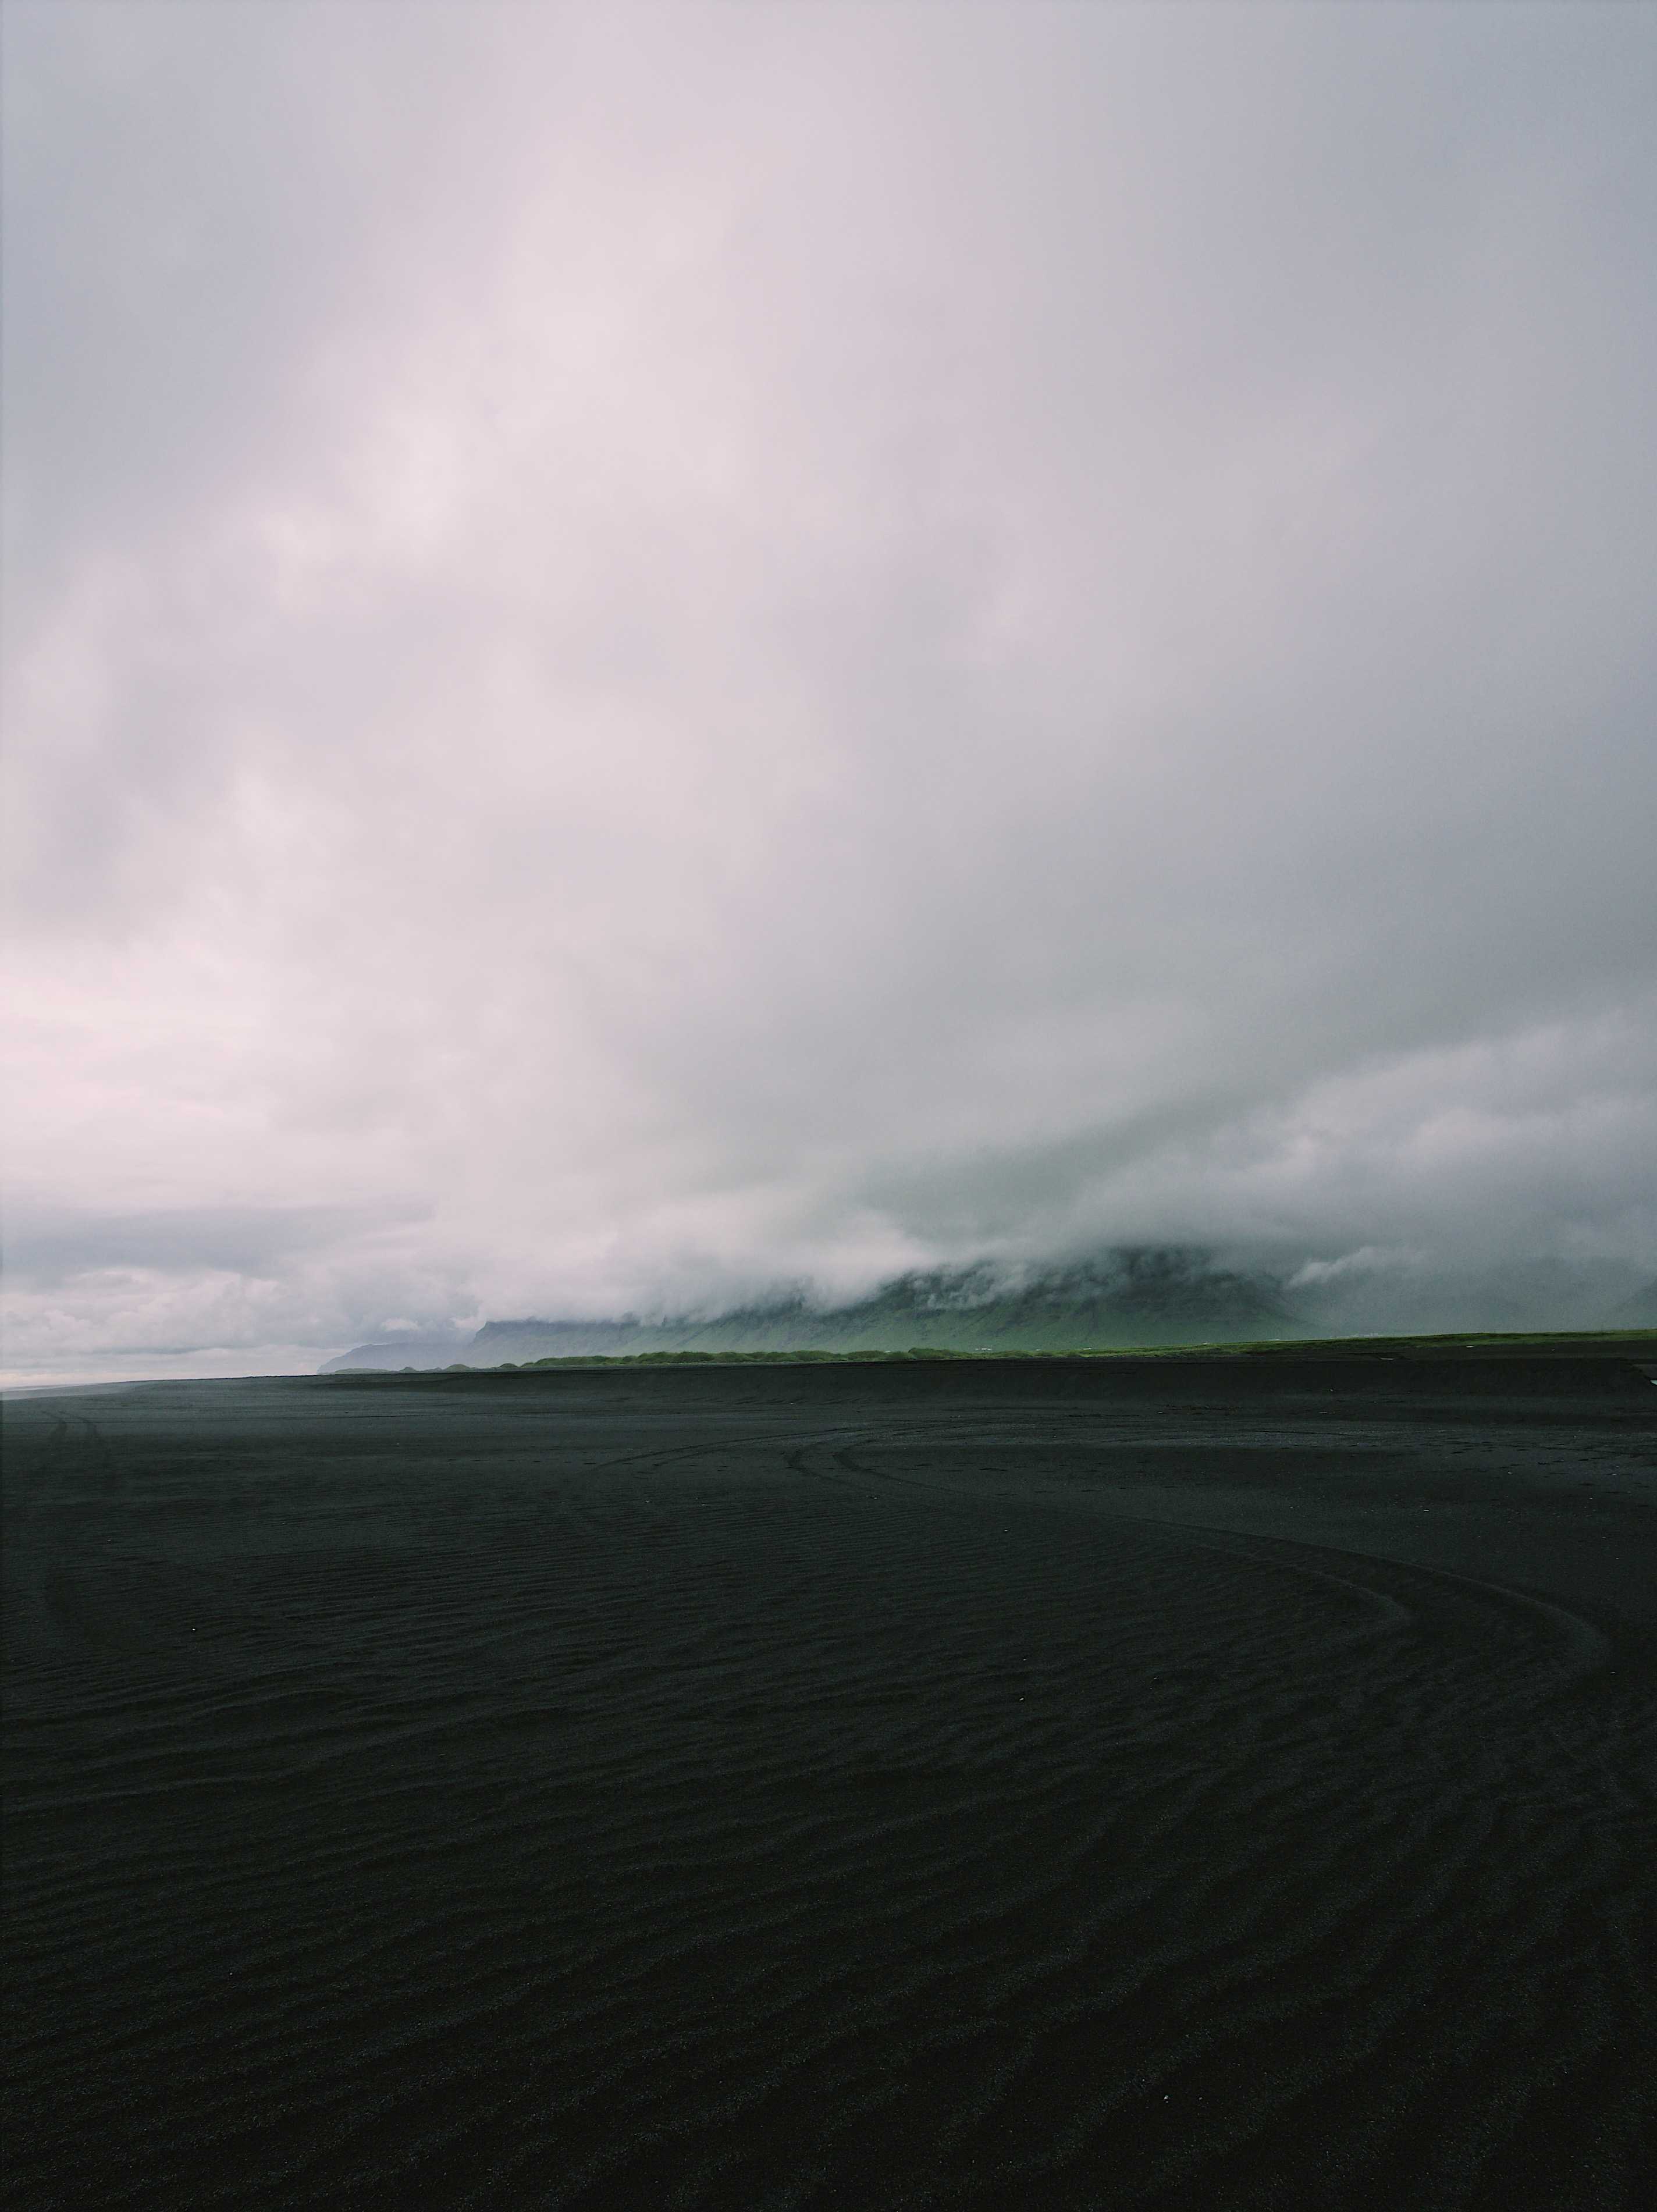 Black sand in the foreground with a mountain covered in clouds in the background